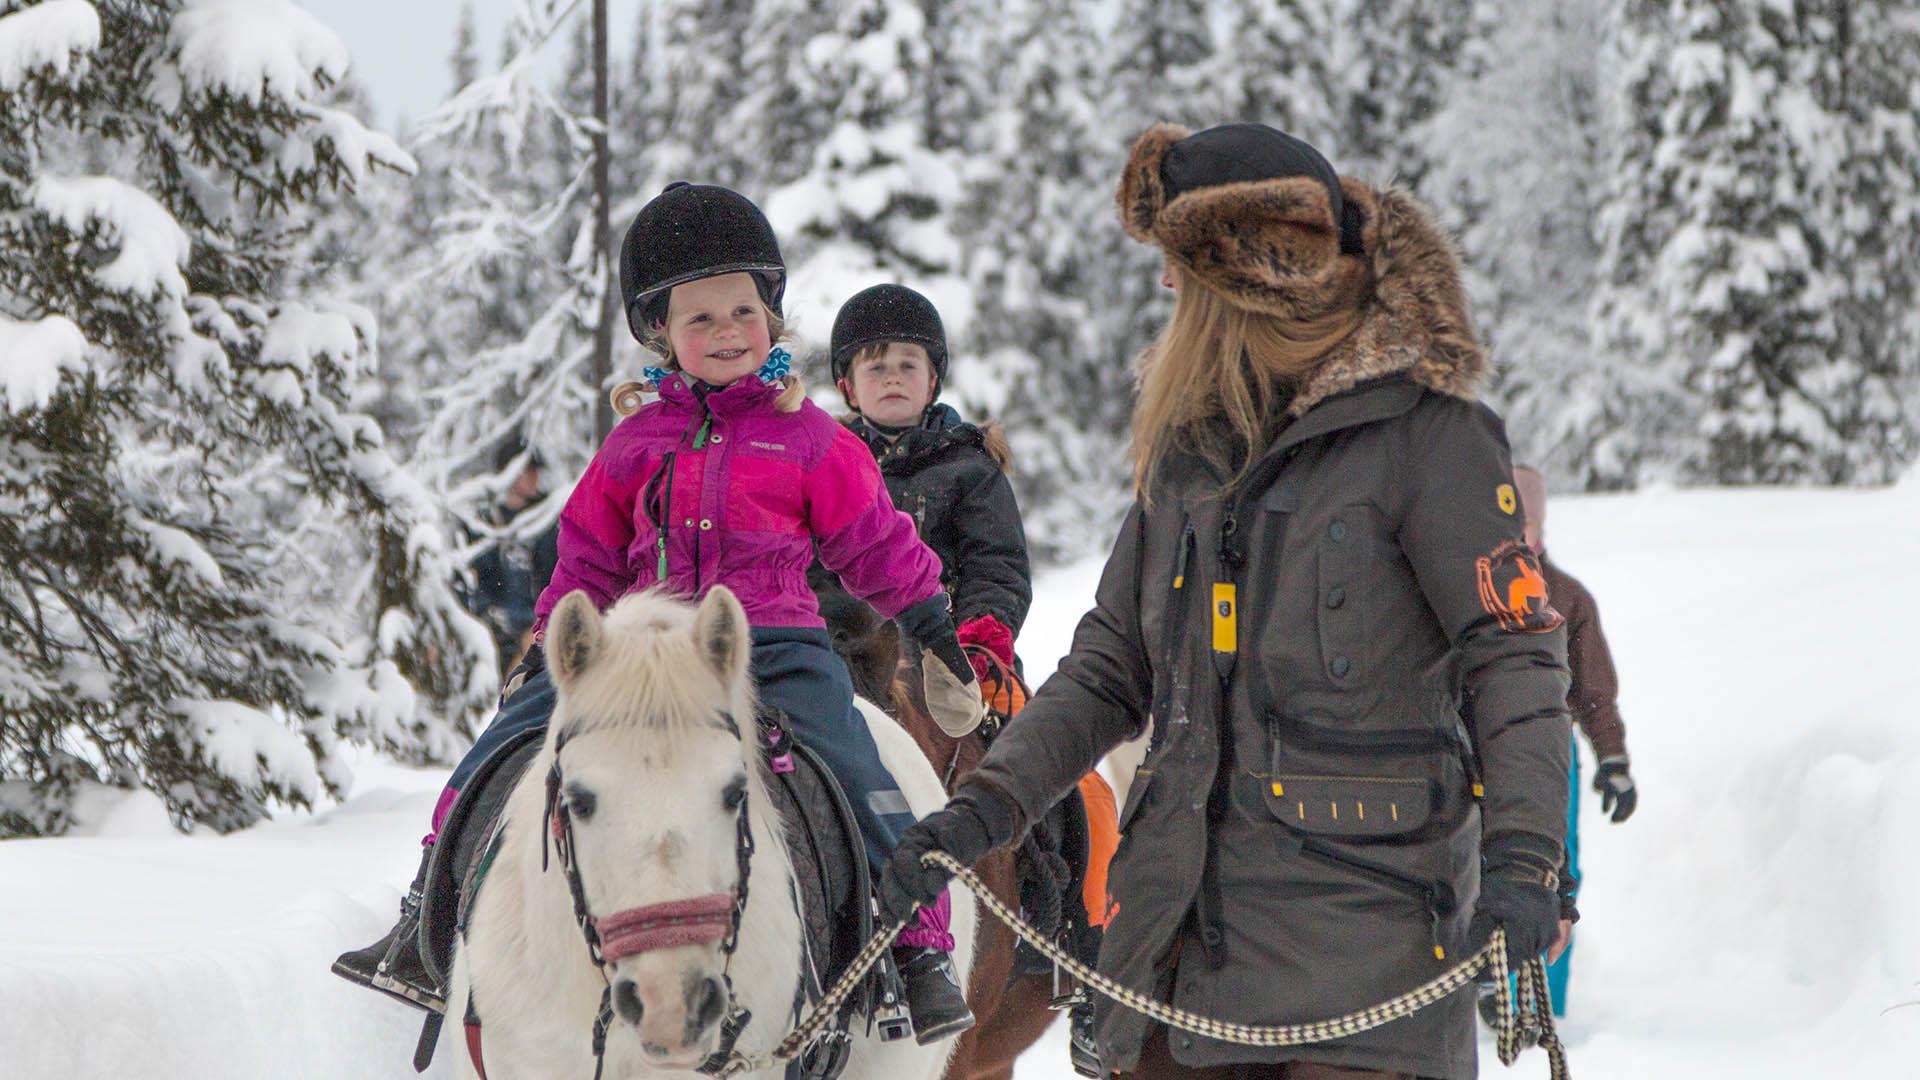 A woman with a fur hat leads two ponies with children riding